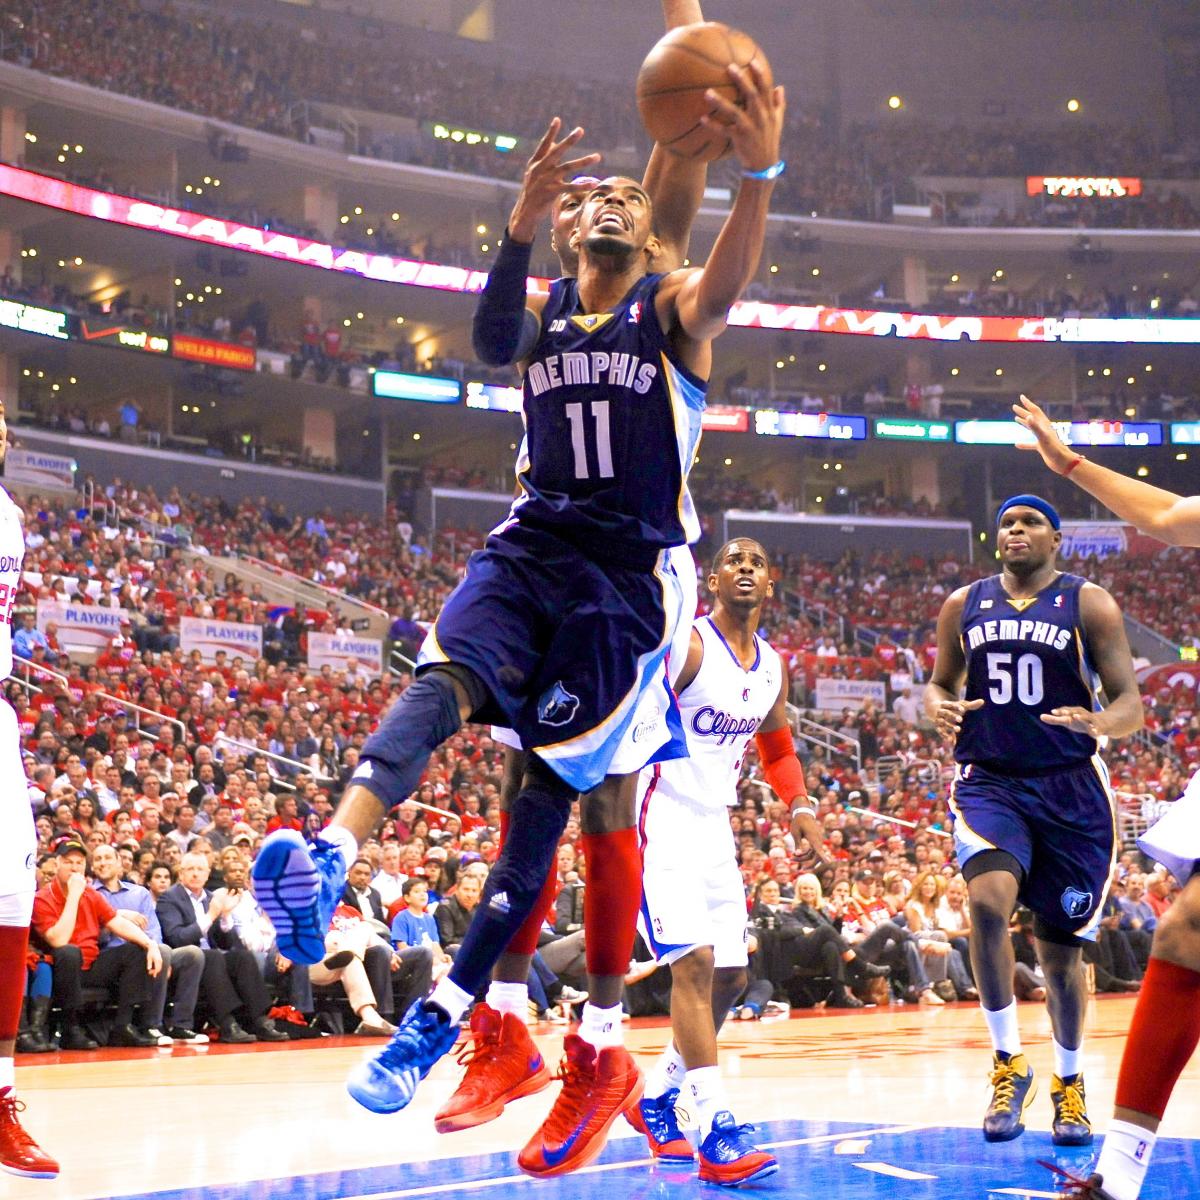 Memphis Grizzlies vs. L.A. Clippers Game 5 Score, Highlights and